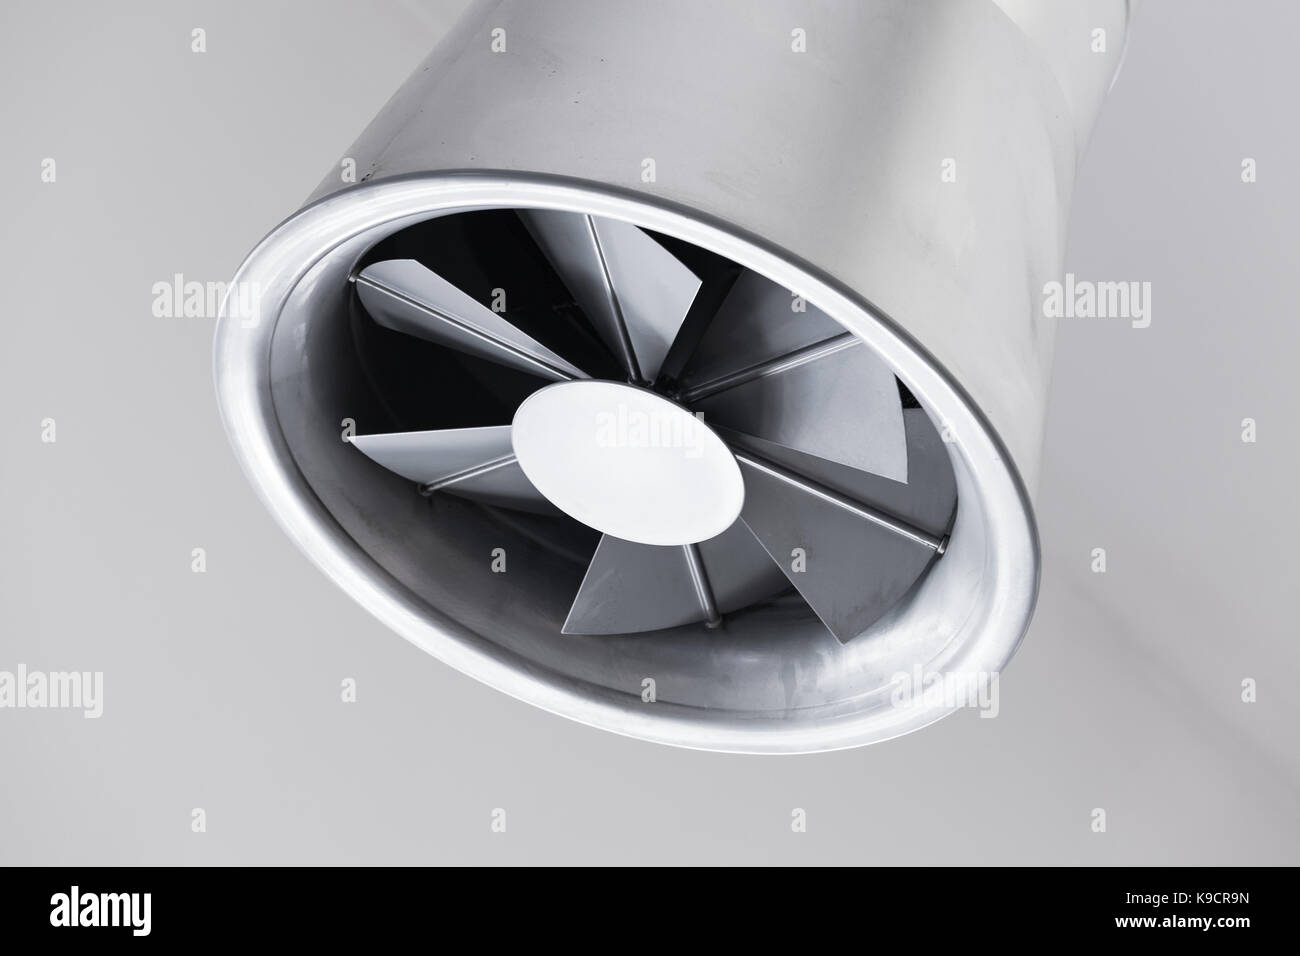 Modern round ventilation fan tube made of stainless steel Stock Photo